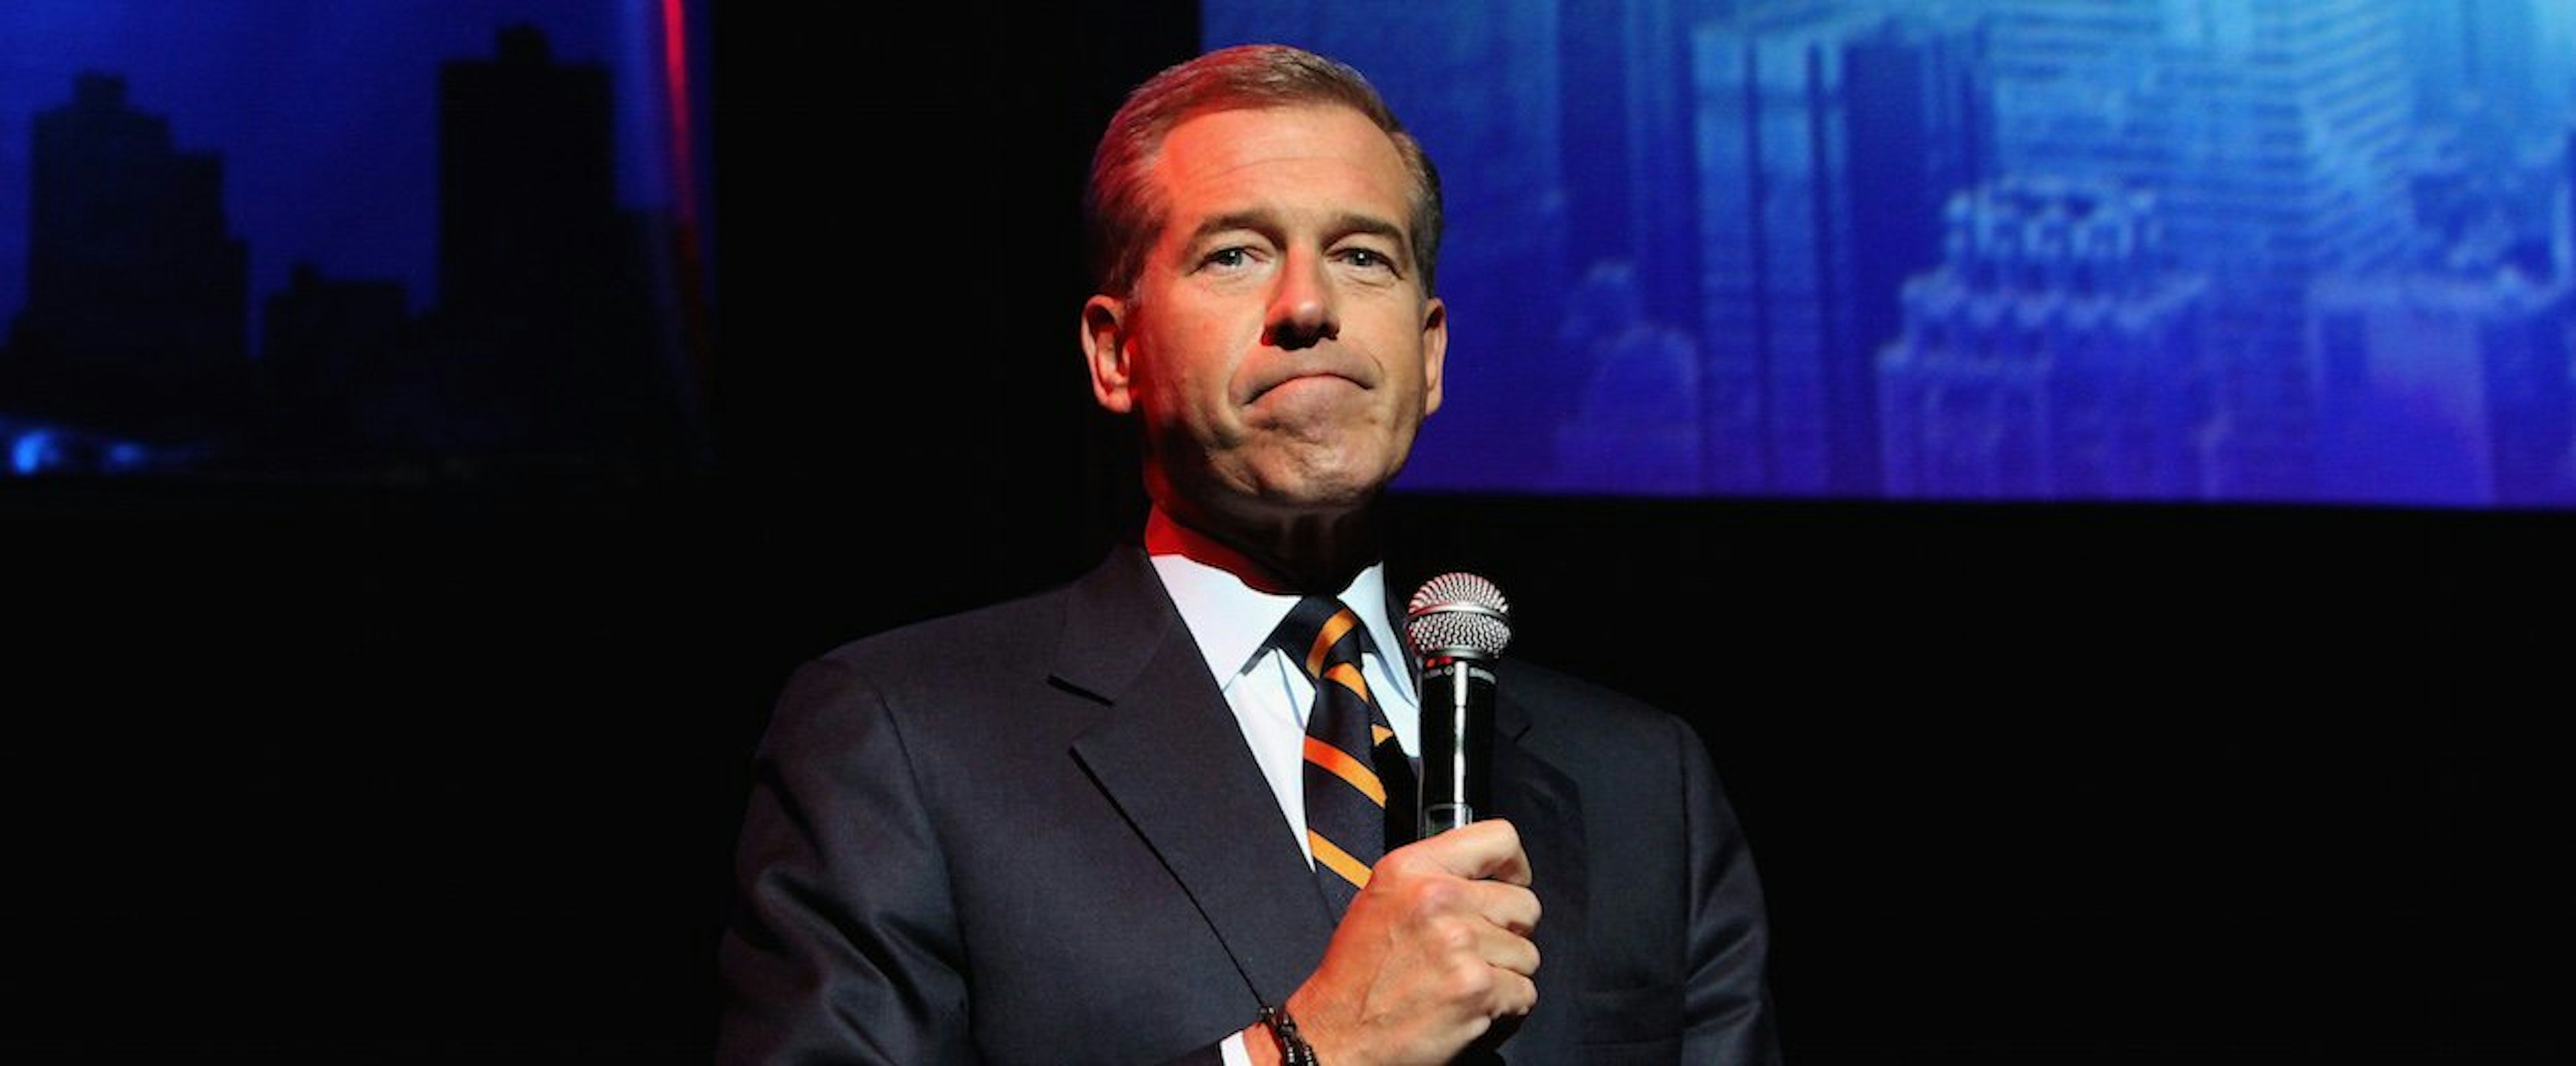 Brian Williams Suspended 6 Months by NBC, But Was He Lying? The New